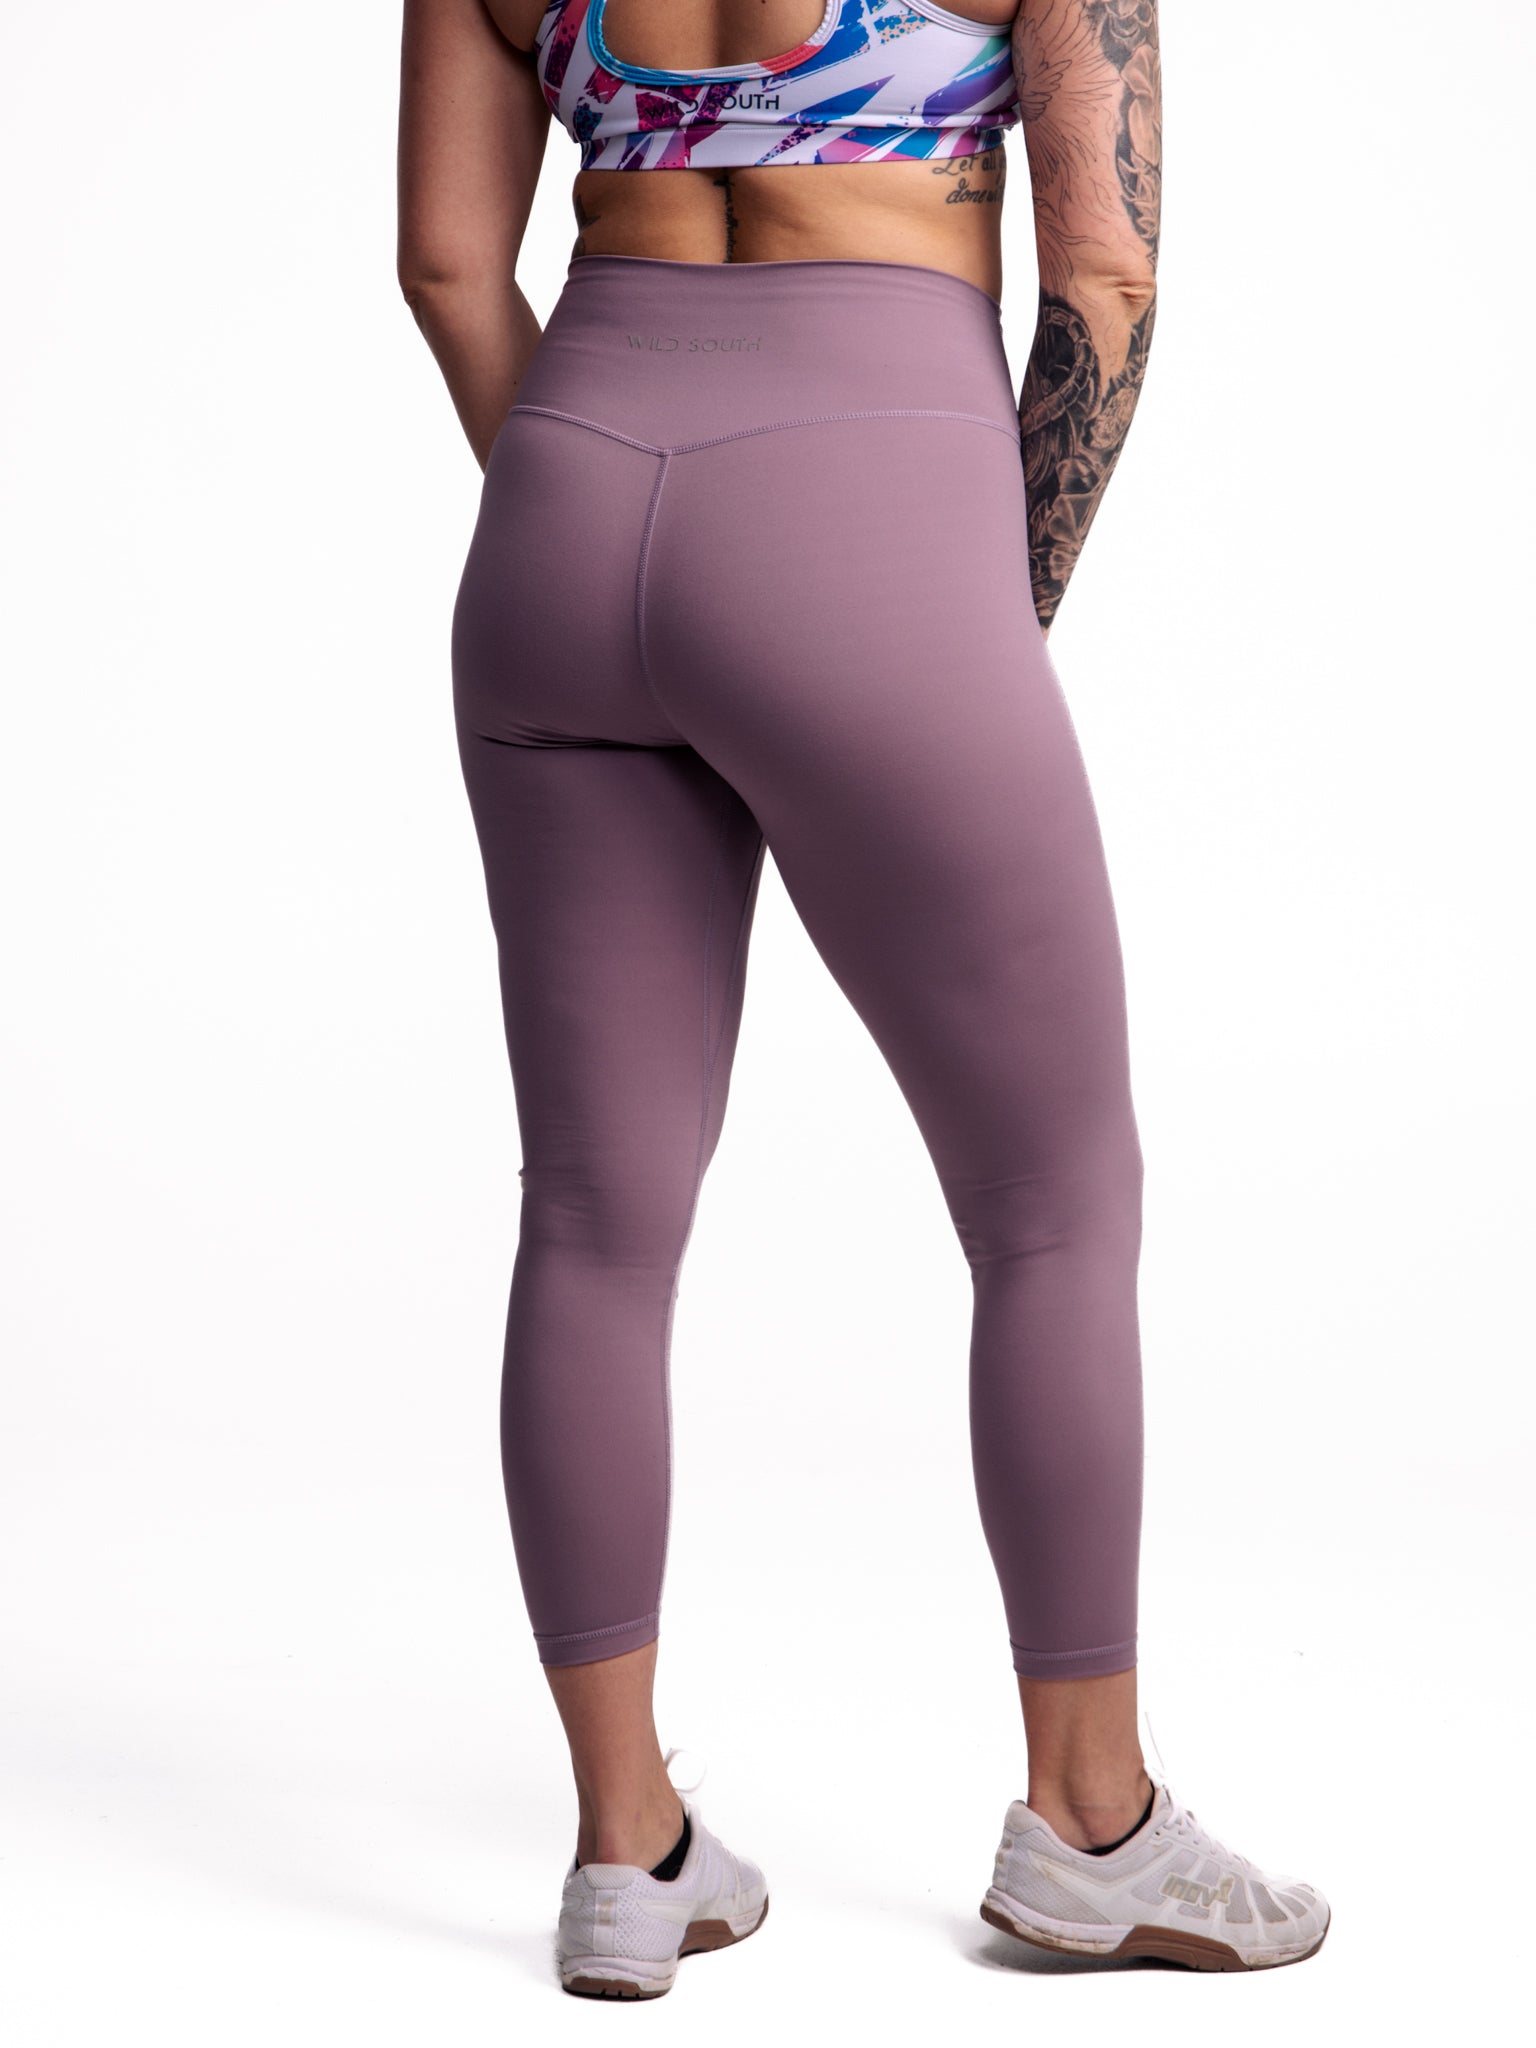 Intuition V1 Leggings - Wild South Apparel